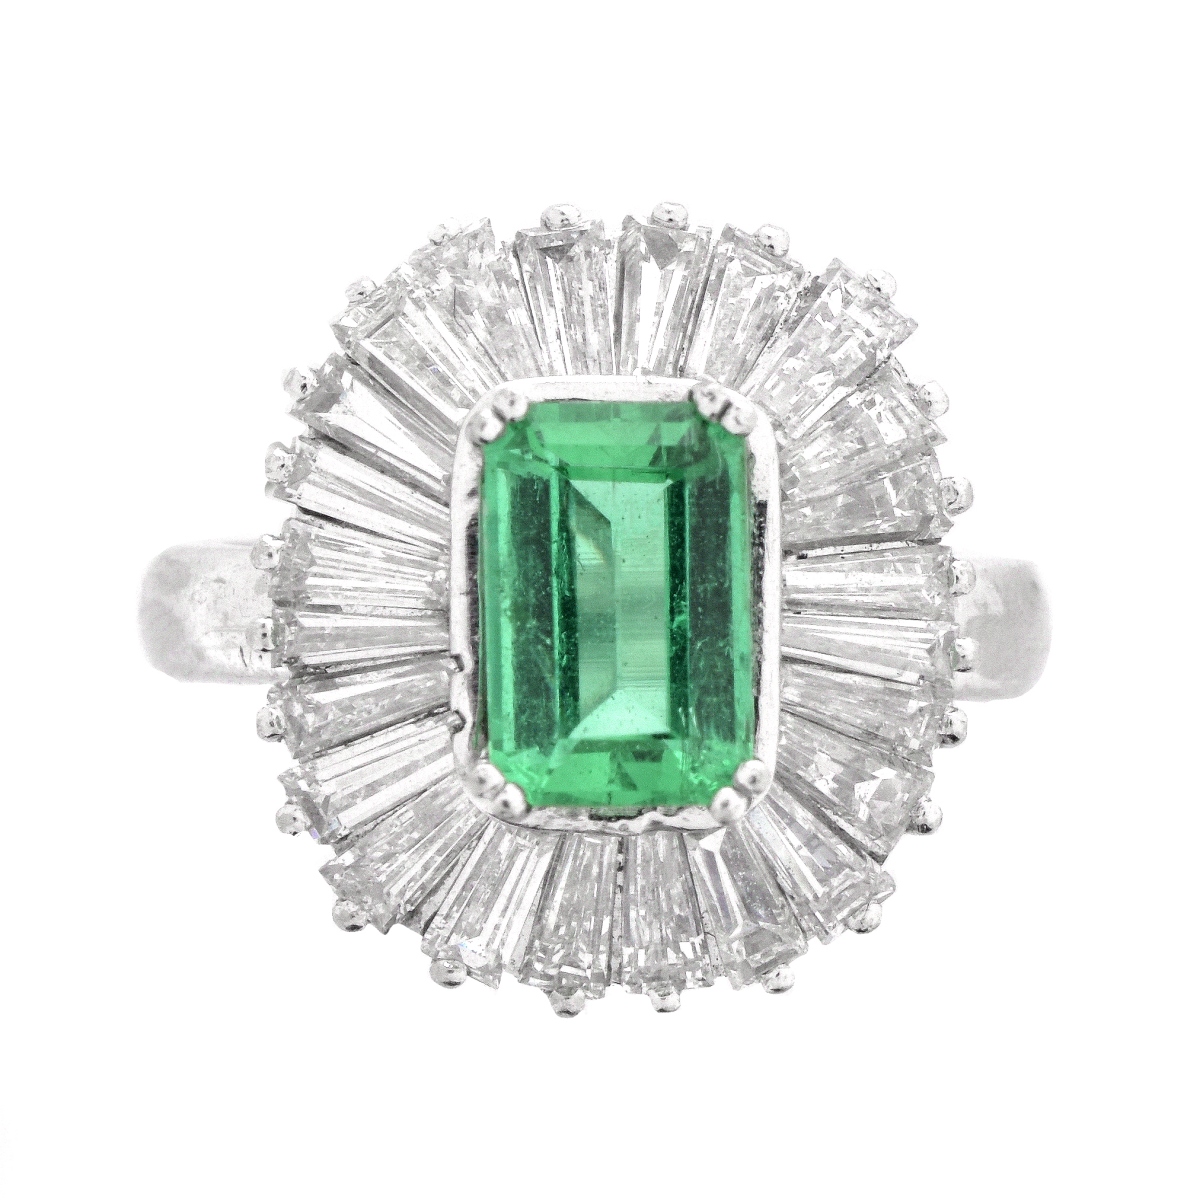 Emerald and Diamond Ring - Image 2 of 6